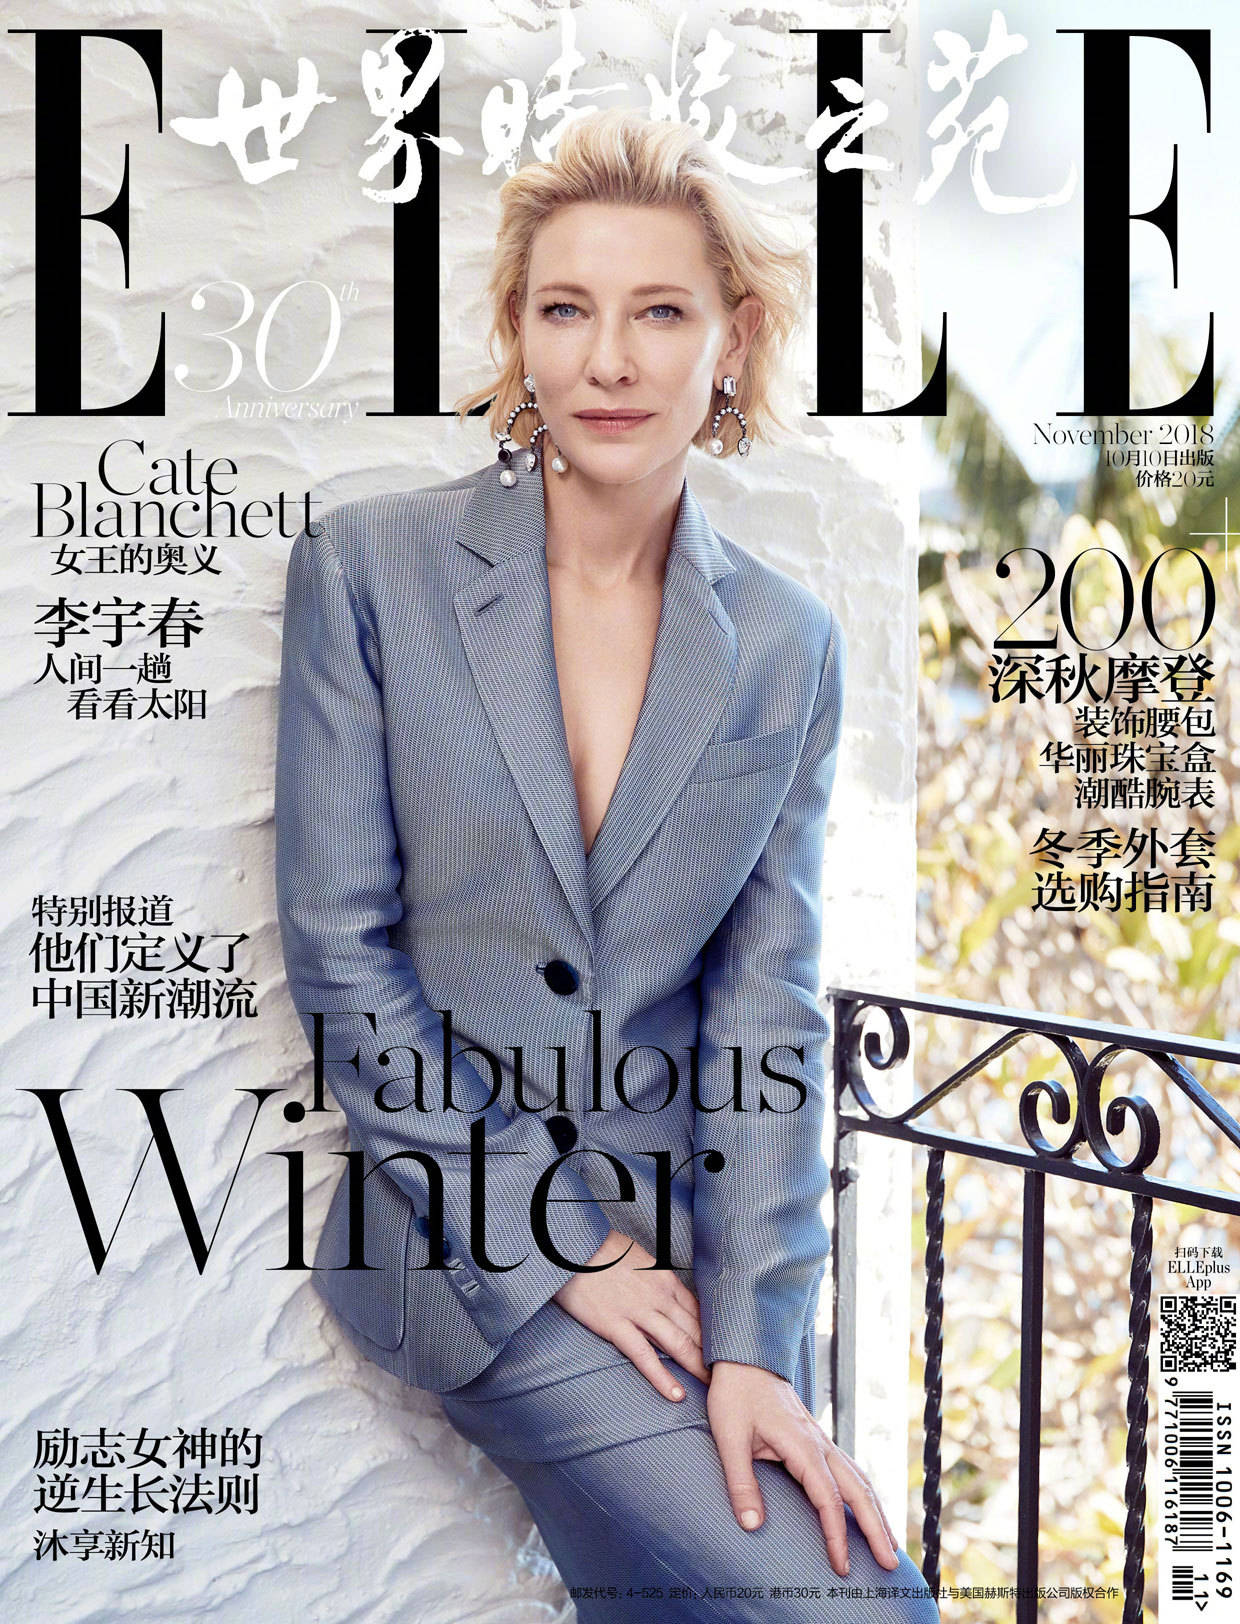 Cate Blanchett Fan At Cate Blanchettcom General Archives